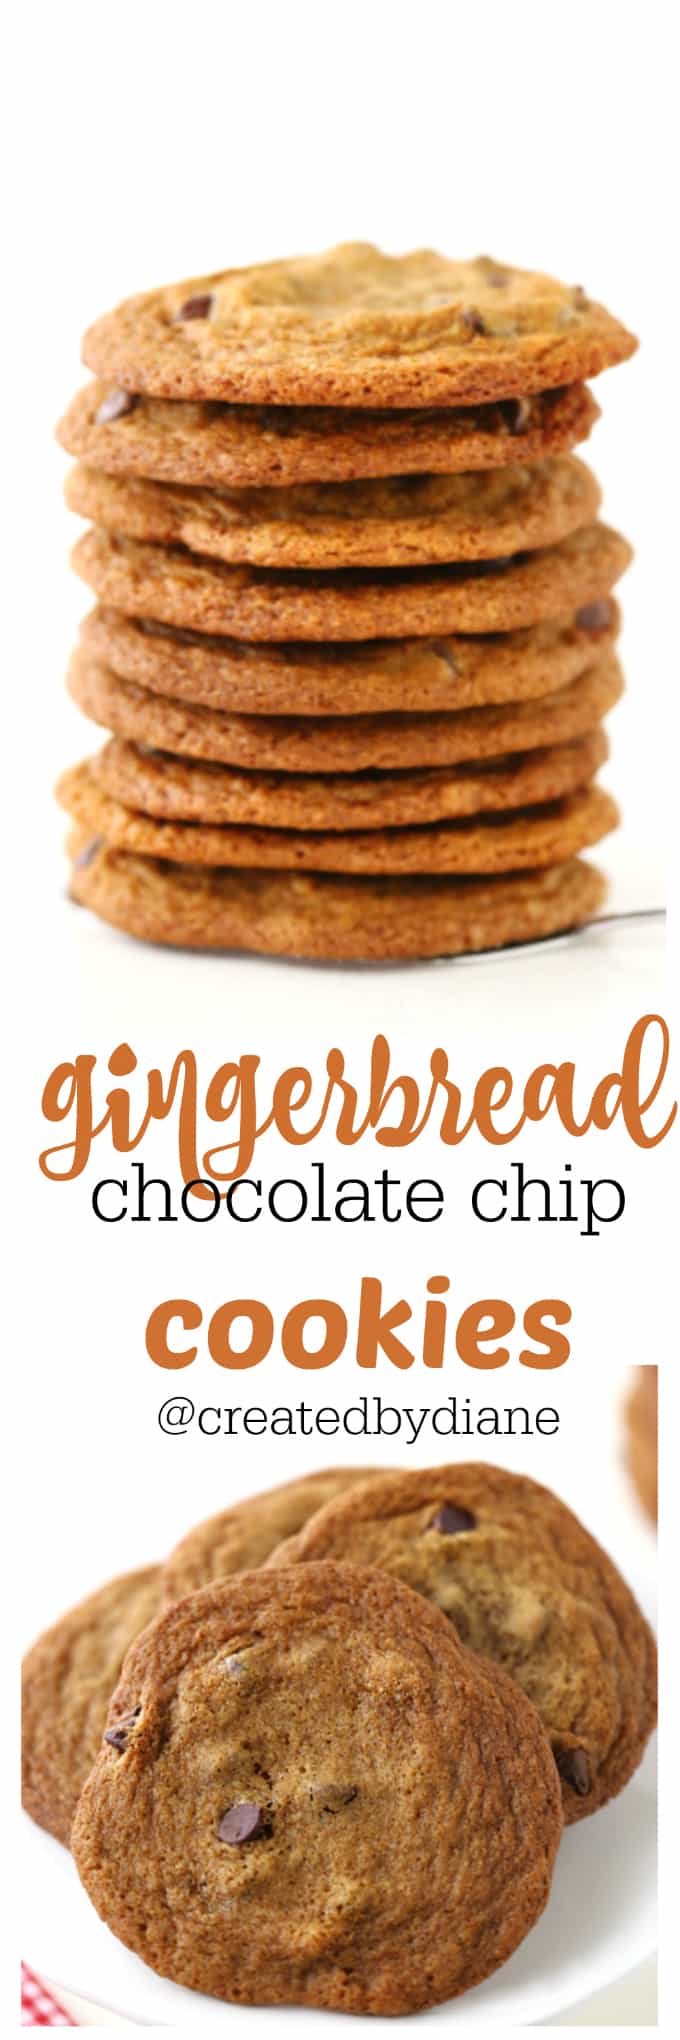 gingerbread-chocolate-chip-cookies-from-createdbydiane